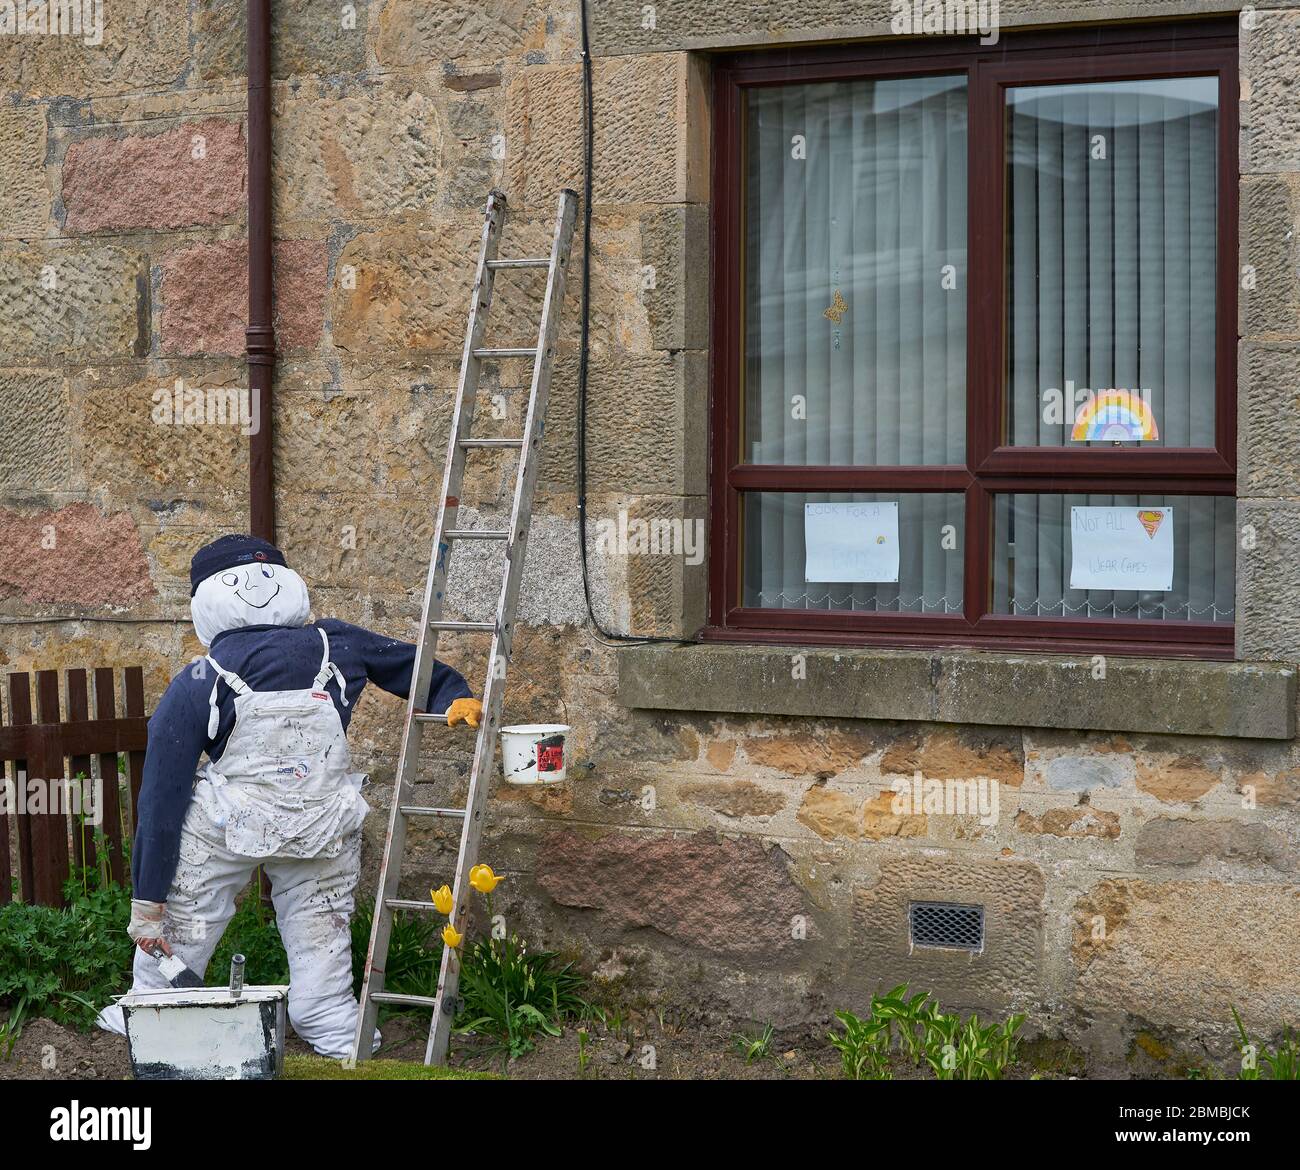 Scarecrow Competition. Dallas, Moray, UK. 8th May, 2020. UK. This is examples of Scarecrows within the village of Dallas in Scotland. This is provide entertainment during the COVID-19 Lockdown. Credit: JASPERIMAGE/Alamy Live News Stock Photo